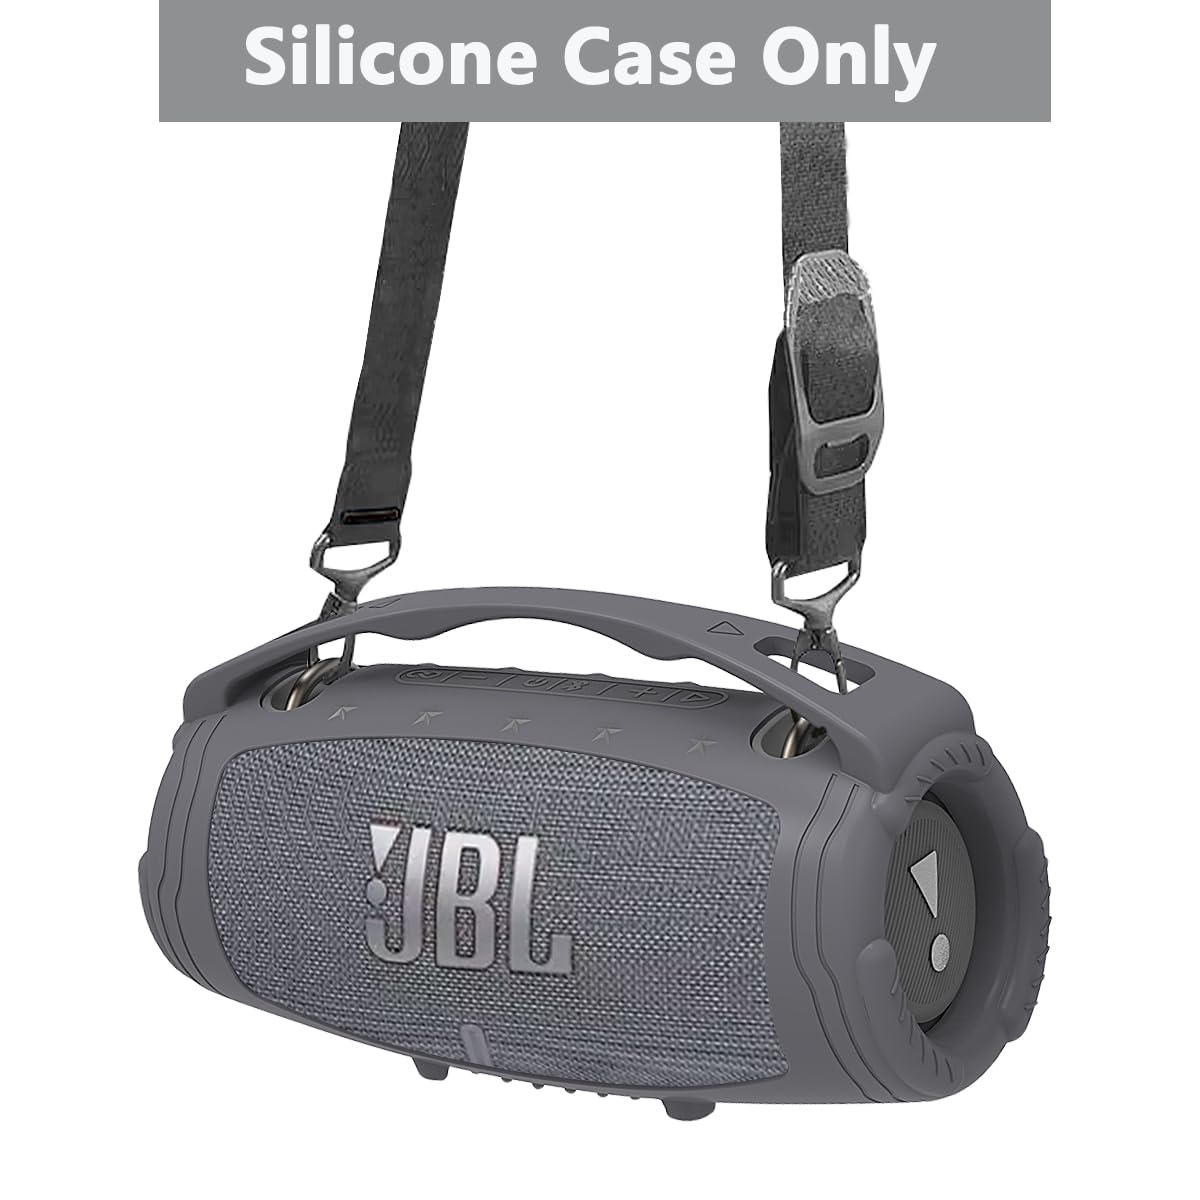 Silicone Cover Case for JBL Xtreme 3 Portable Bluetooth Speaker, Protective Skin Case for JBL Xtreme 3 Portable Bluetooth Speaker Accessories(Only Case)(Grey)